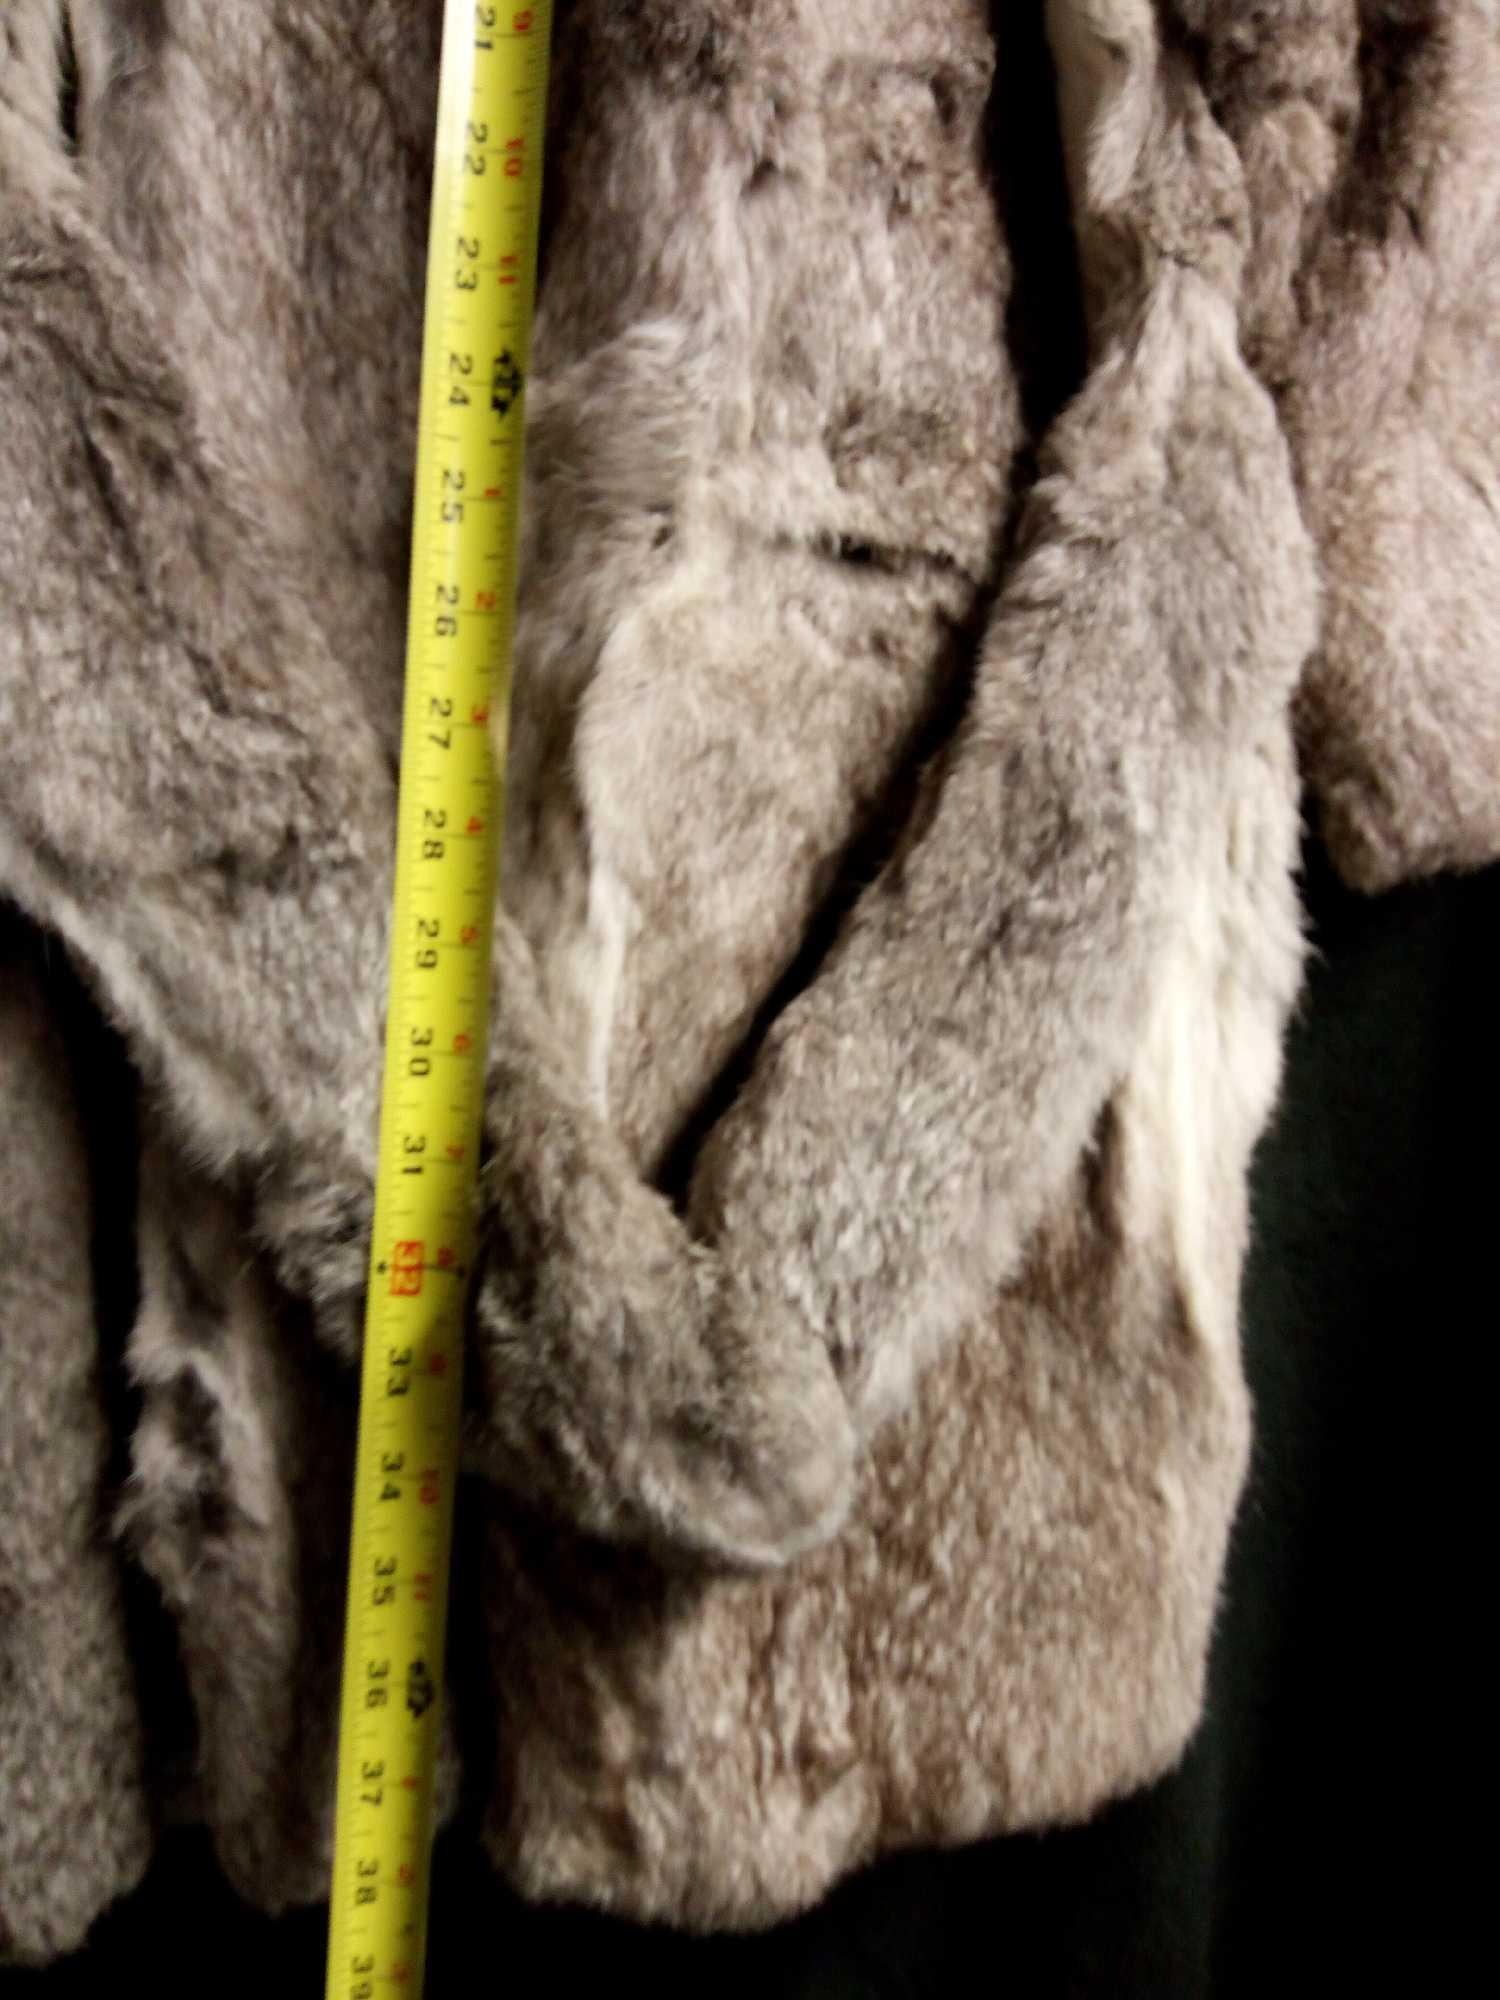 GORGEOUS WELL MADE gray and white KNEE LENGTH FUR JACKET